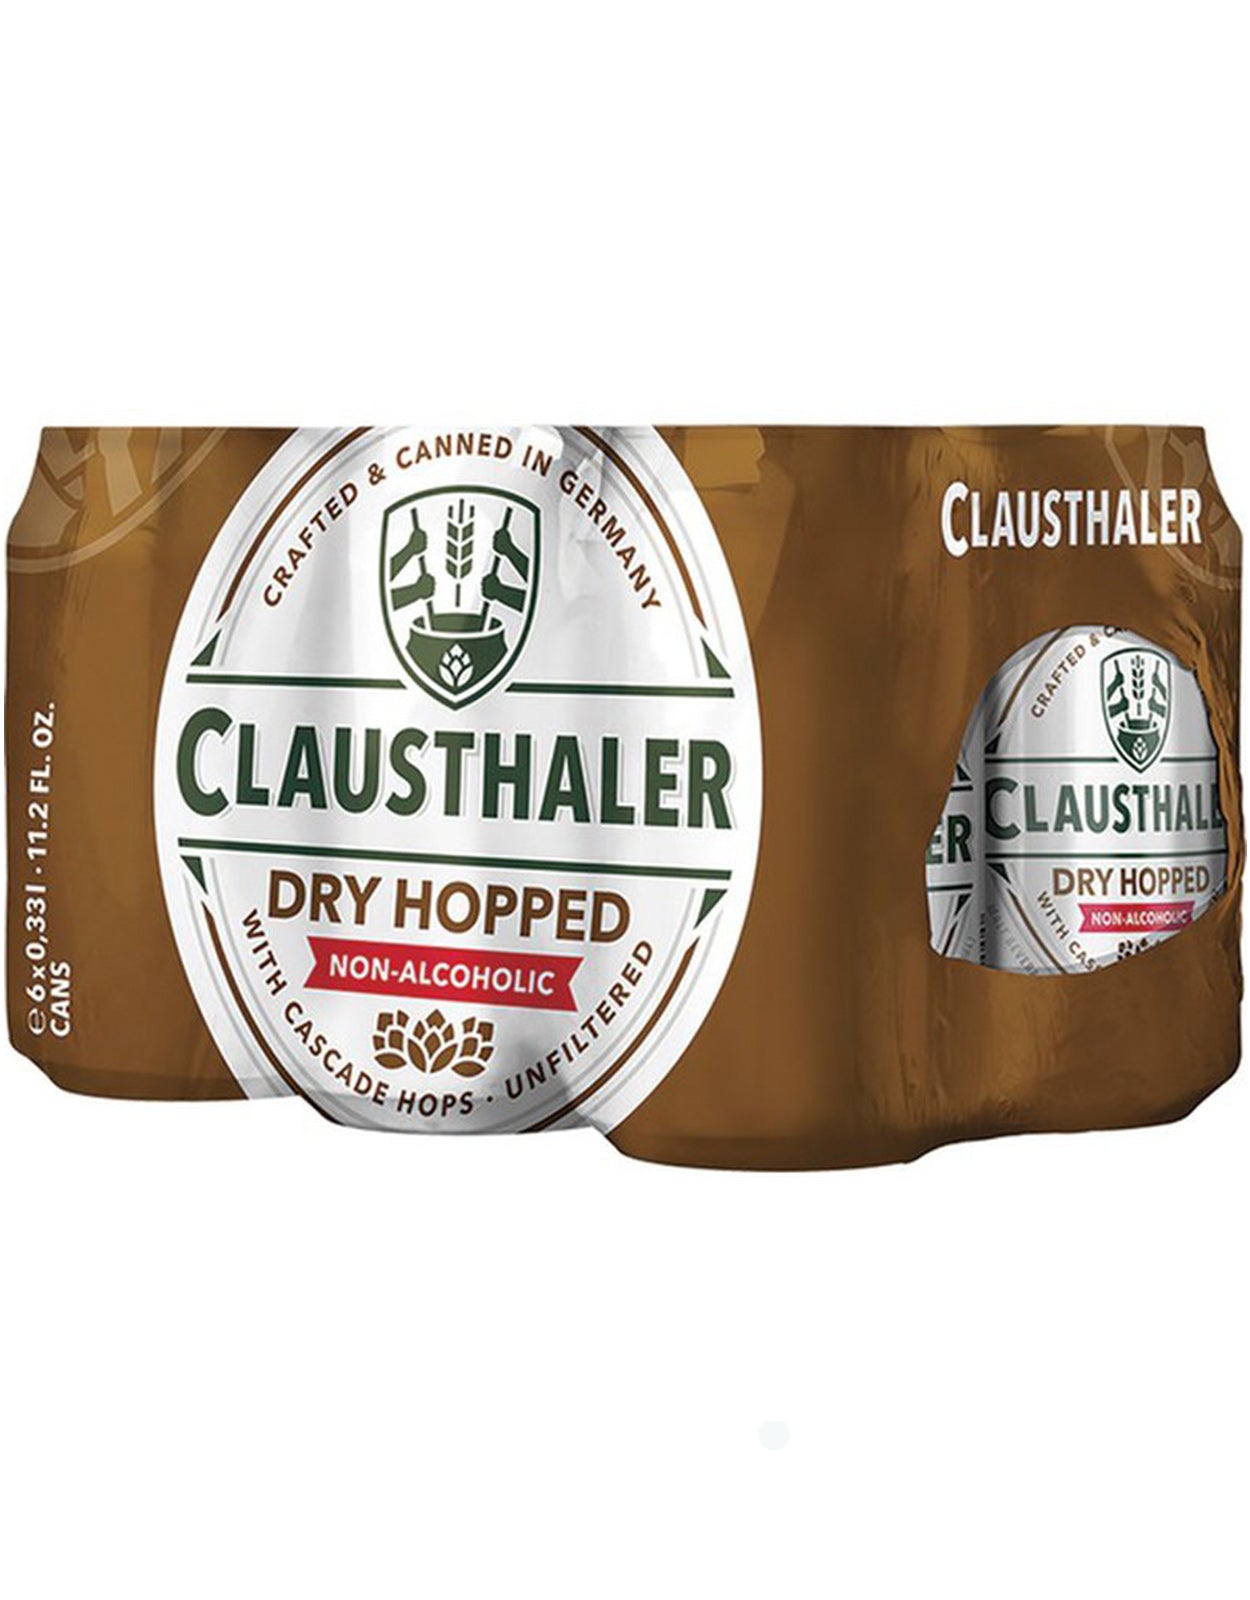 Clausthaler Dry Hopped (Non Alcoholic) 330 ml - 6 Cans